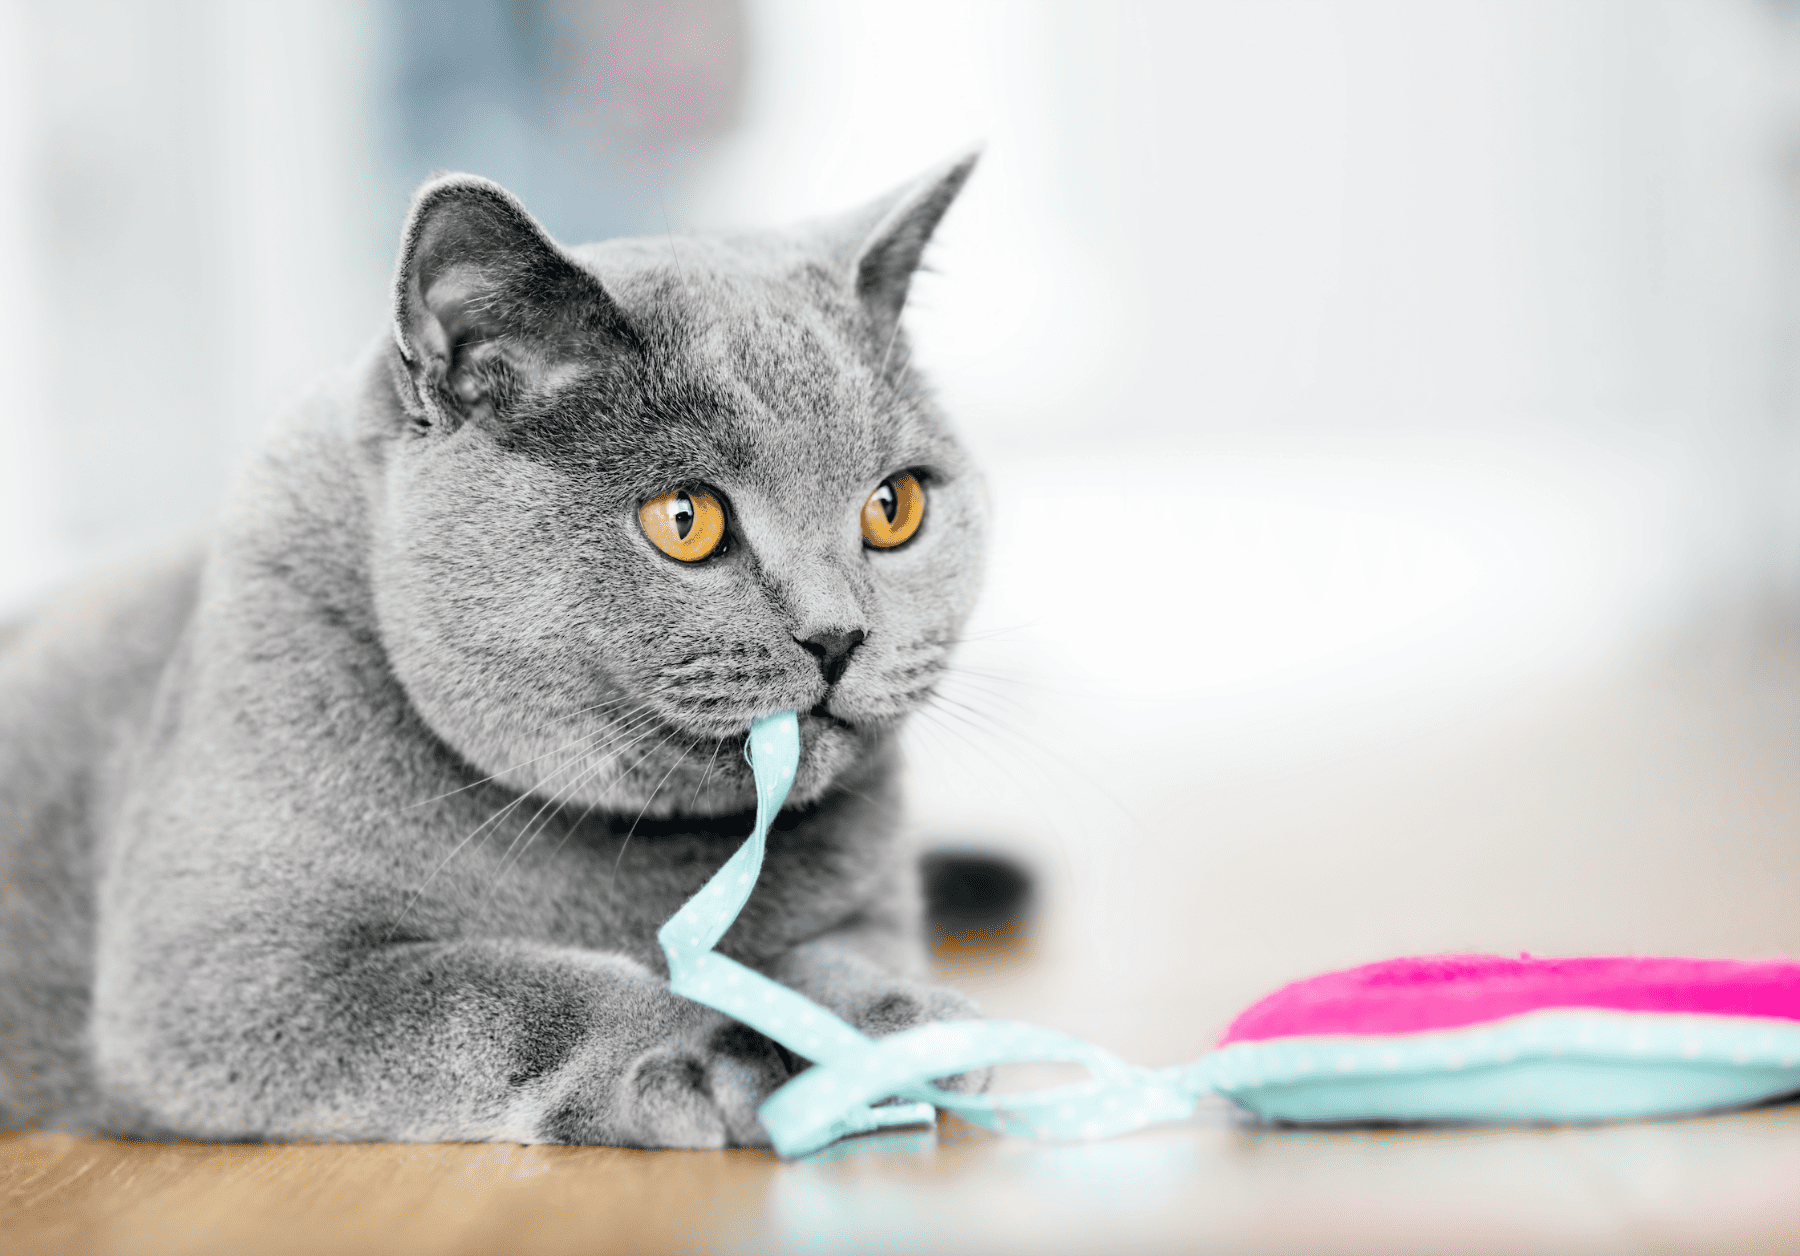 https://www.totallypurrfect.com/wp-content/uploads/2022/09/Toys-Cats-Can-Play-With-By-Themselves-2-1.png